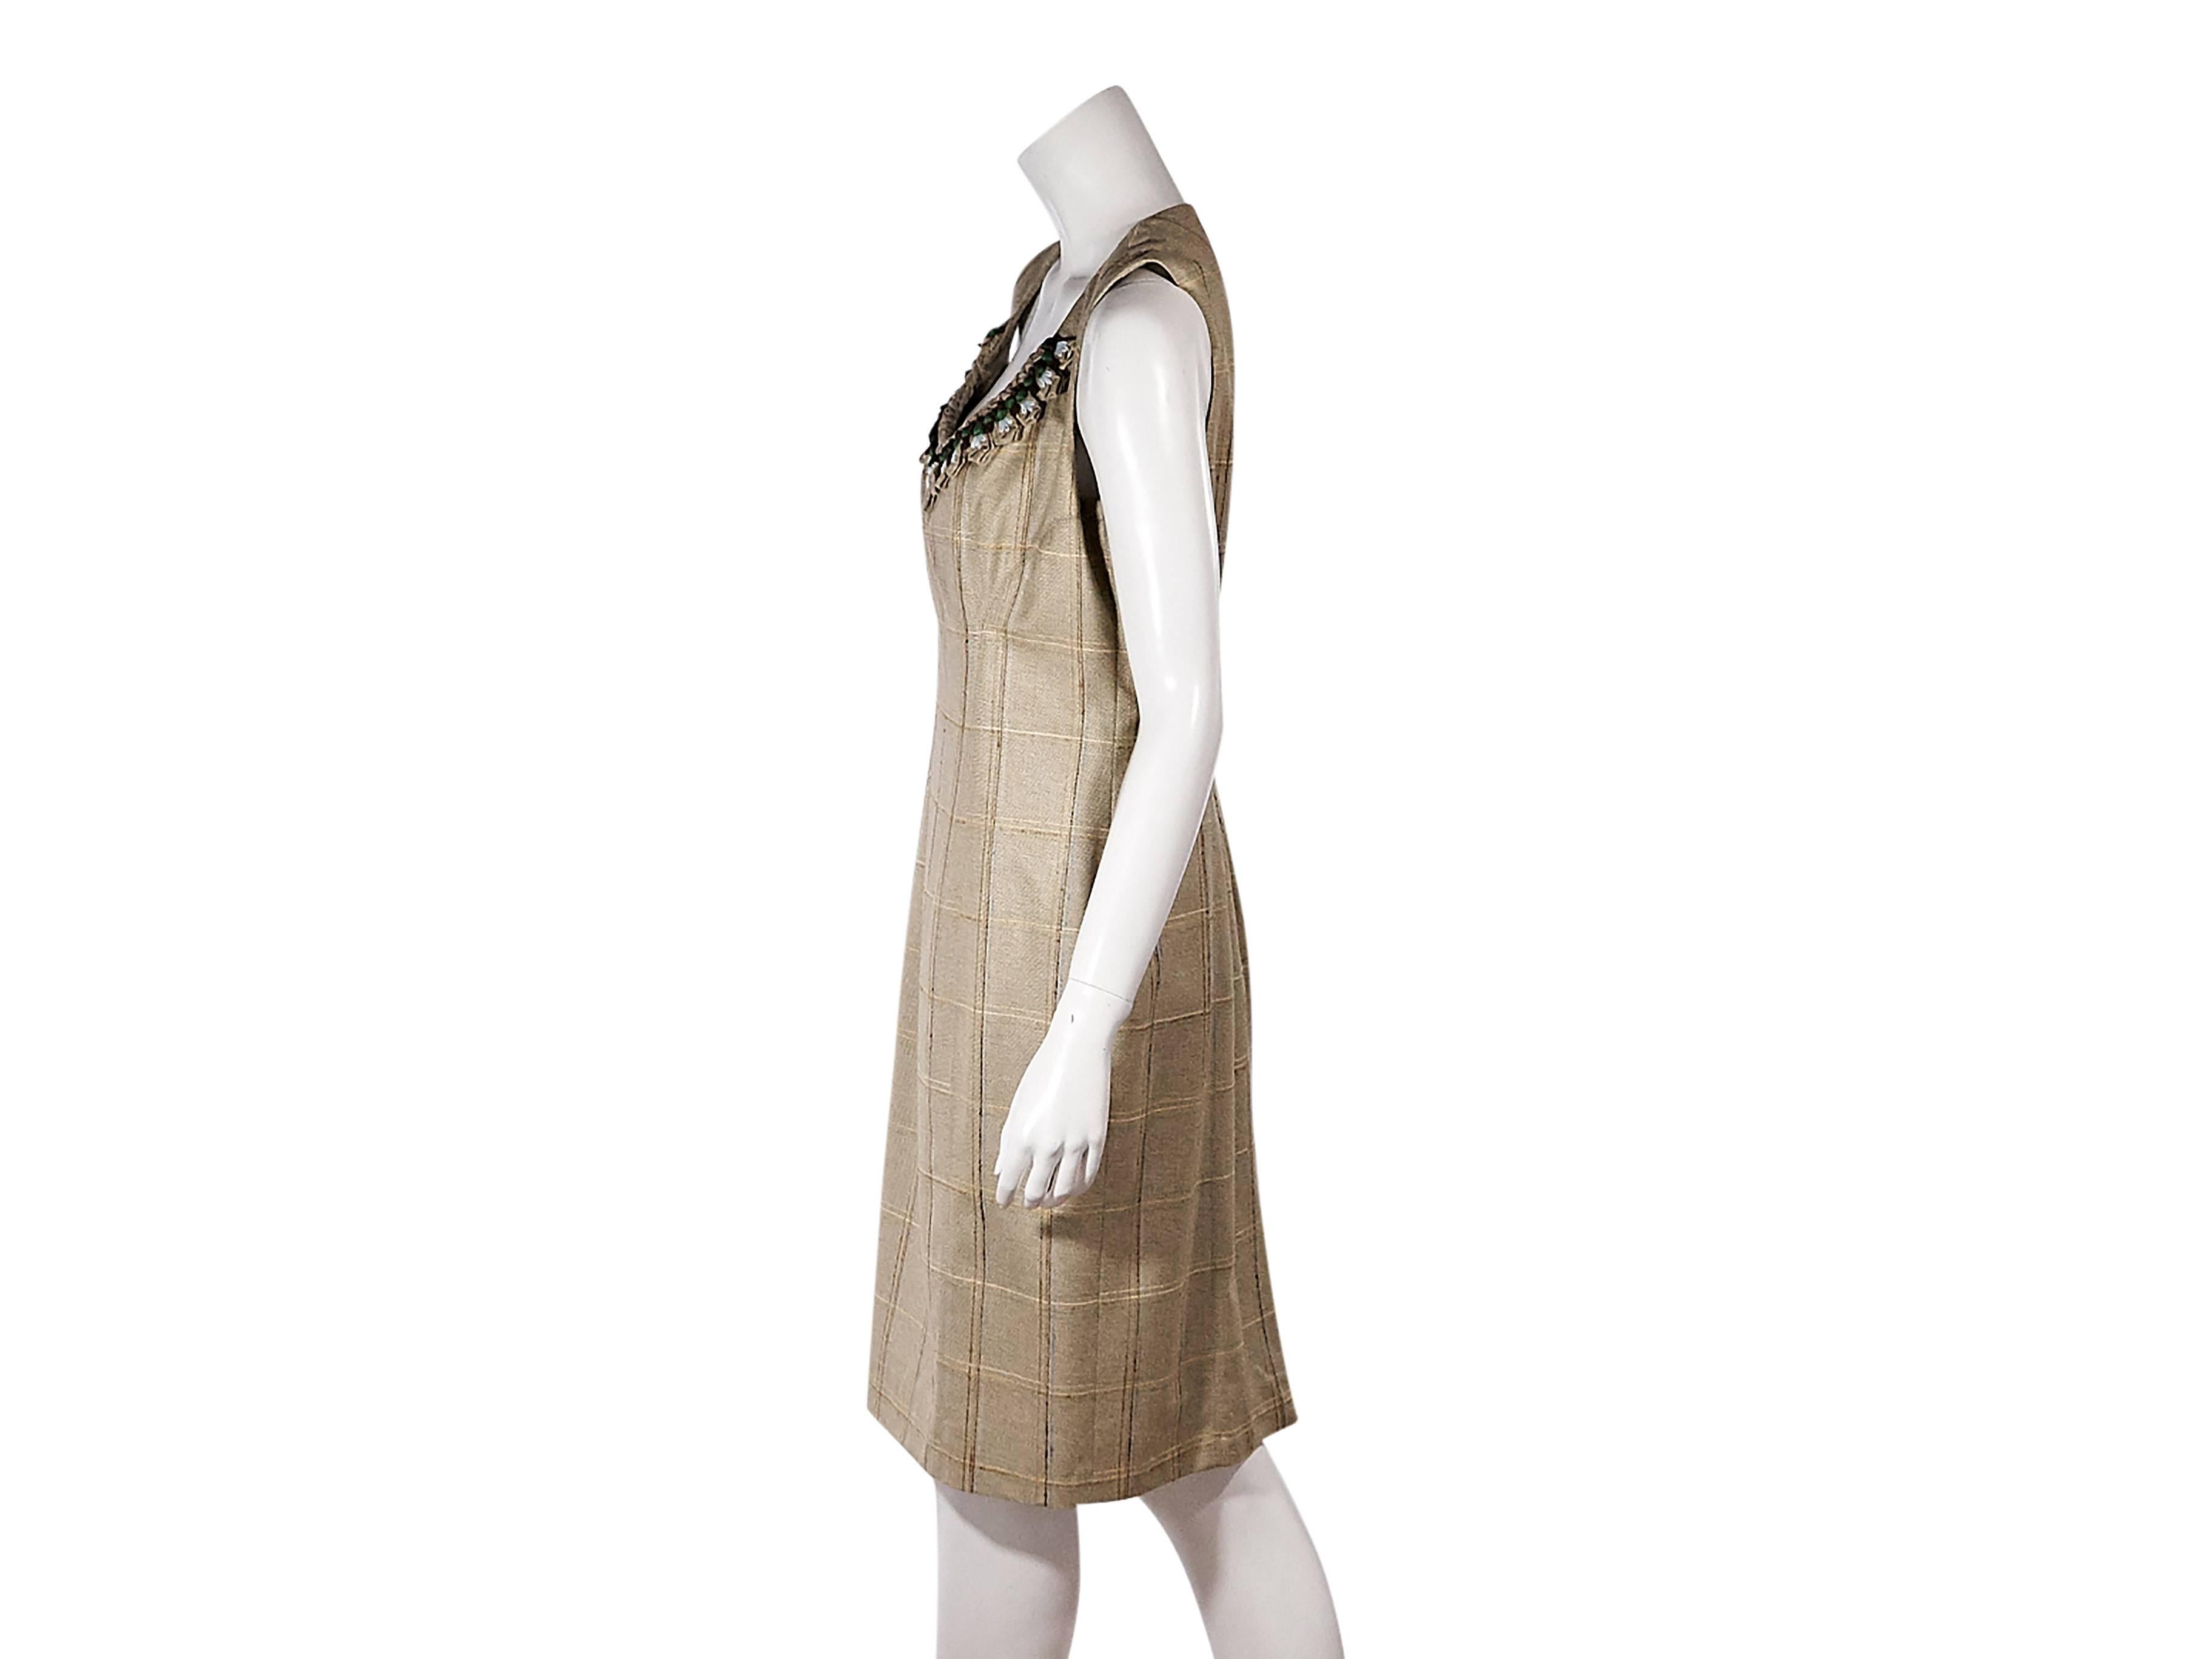 Product details:  Tan plaid sheath dress by Carolina Herrera.  Embellished scoopneck.  Sleeveless.  Concealed back zip closure.  Back center hem vent.  
Condition: Pre-owned. Very good.

Est. Retail $ 798.00
Size14